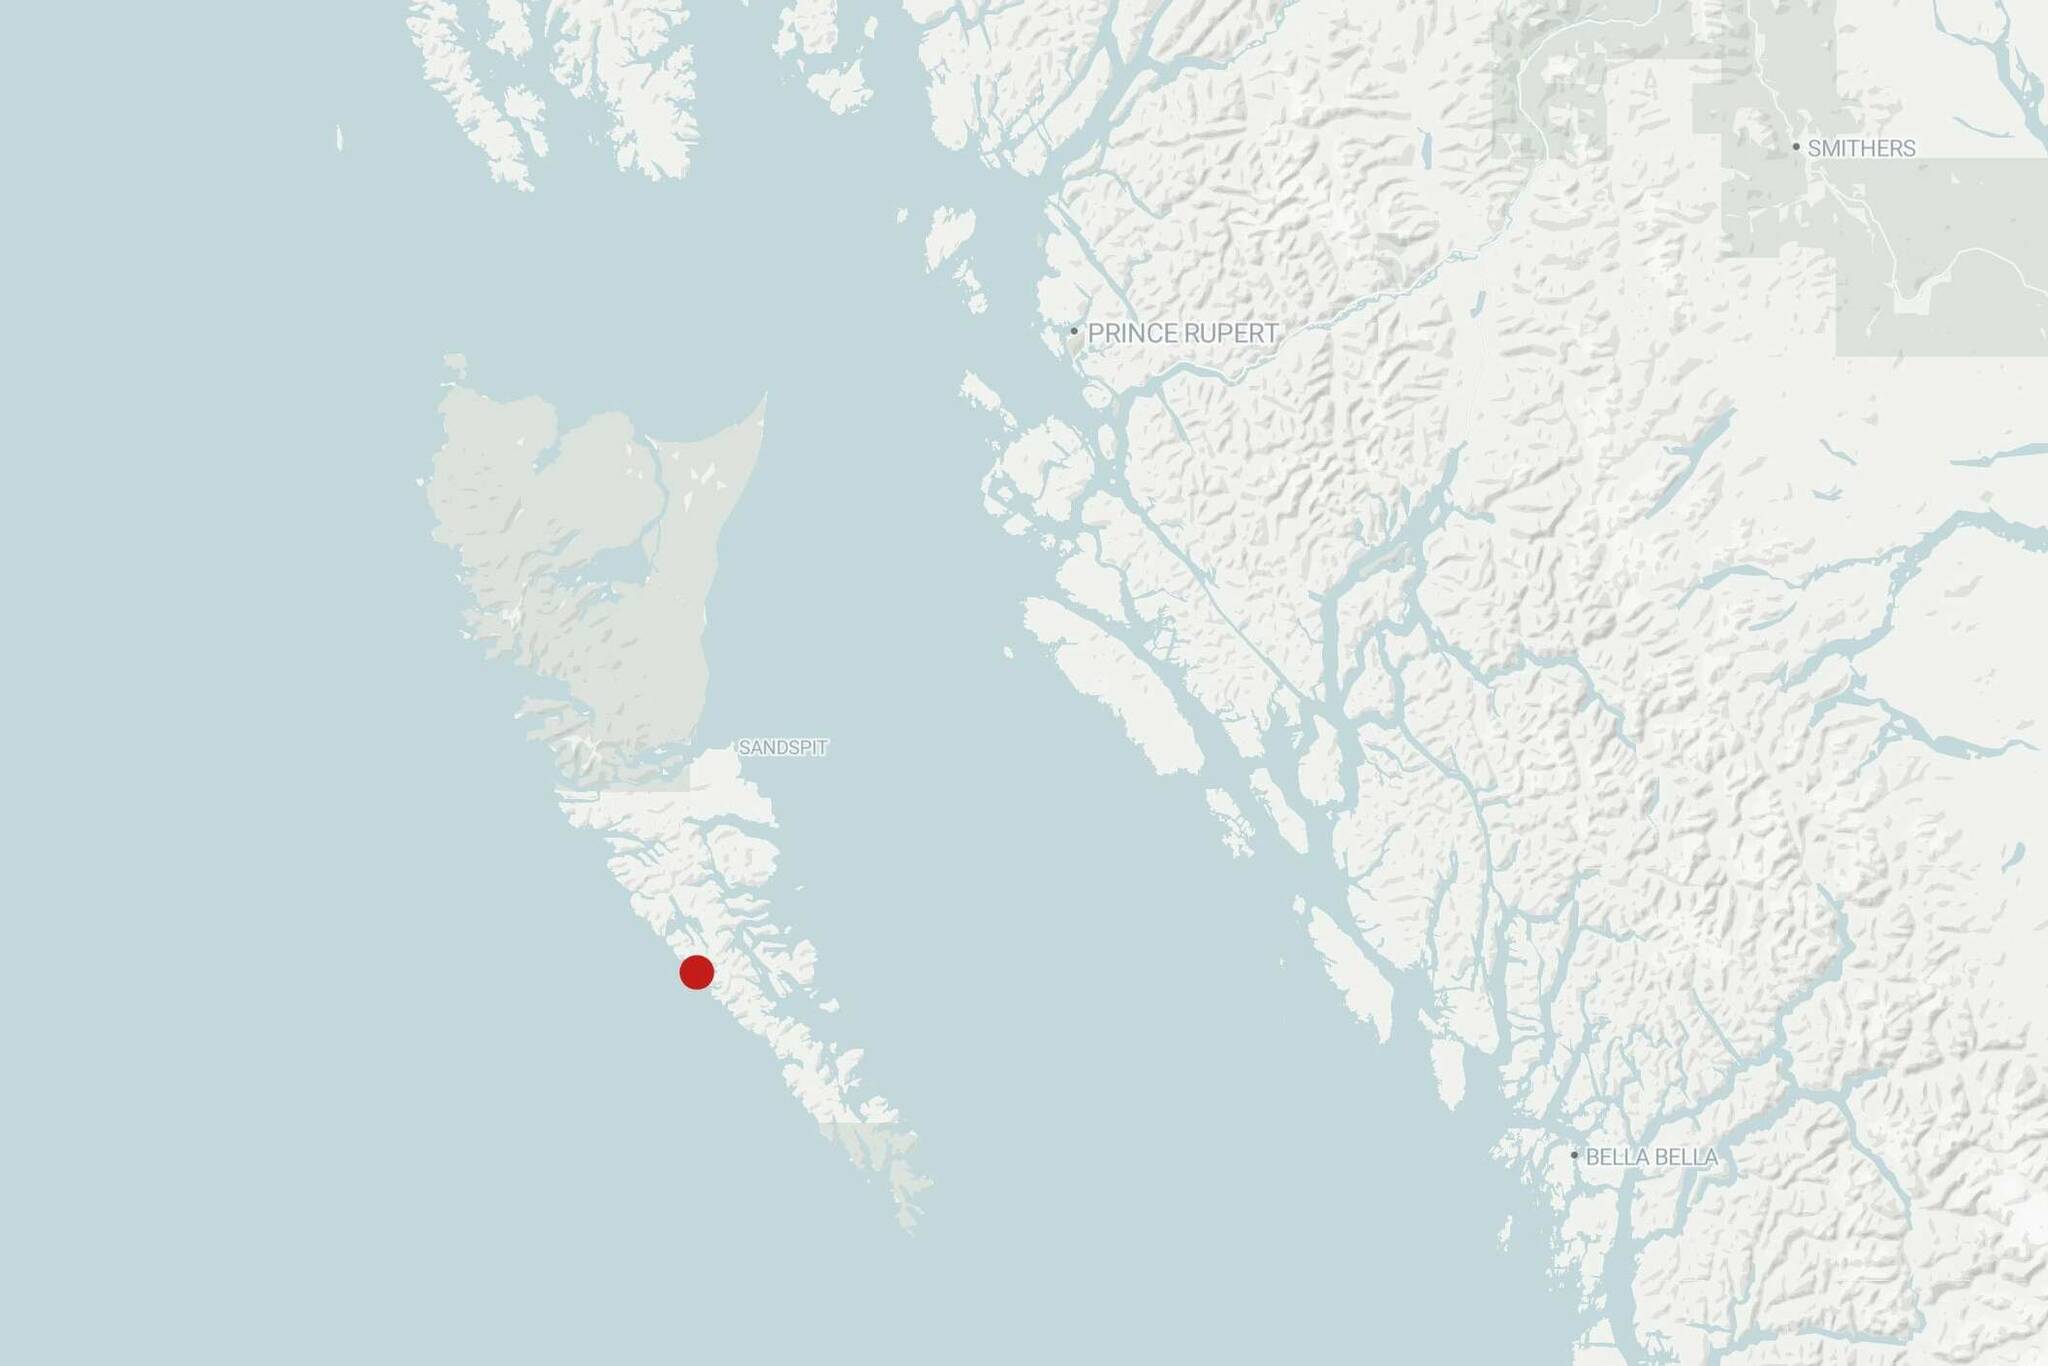 A map displaying the location of the 4.7 magnitude earthquake that struck near a village in British Columbia on Aug. 15. The epicentre was situated 70 kilometres south of Daajing Giids and 222 kilometres southwest of Prince Rupert, in a region known for its significant seismic activity. An expert suggests this tremor could be a later aftershock of the major 2012 quake in the same area. (OpenStreetMap)